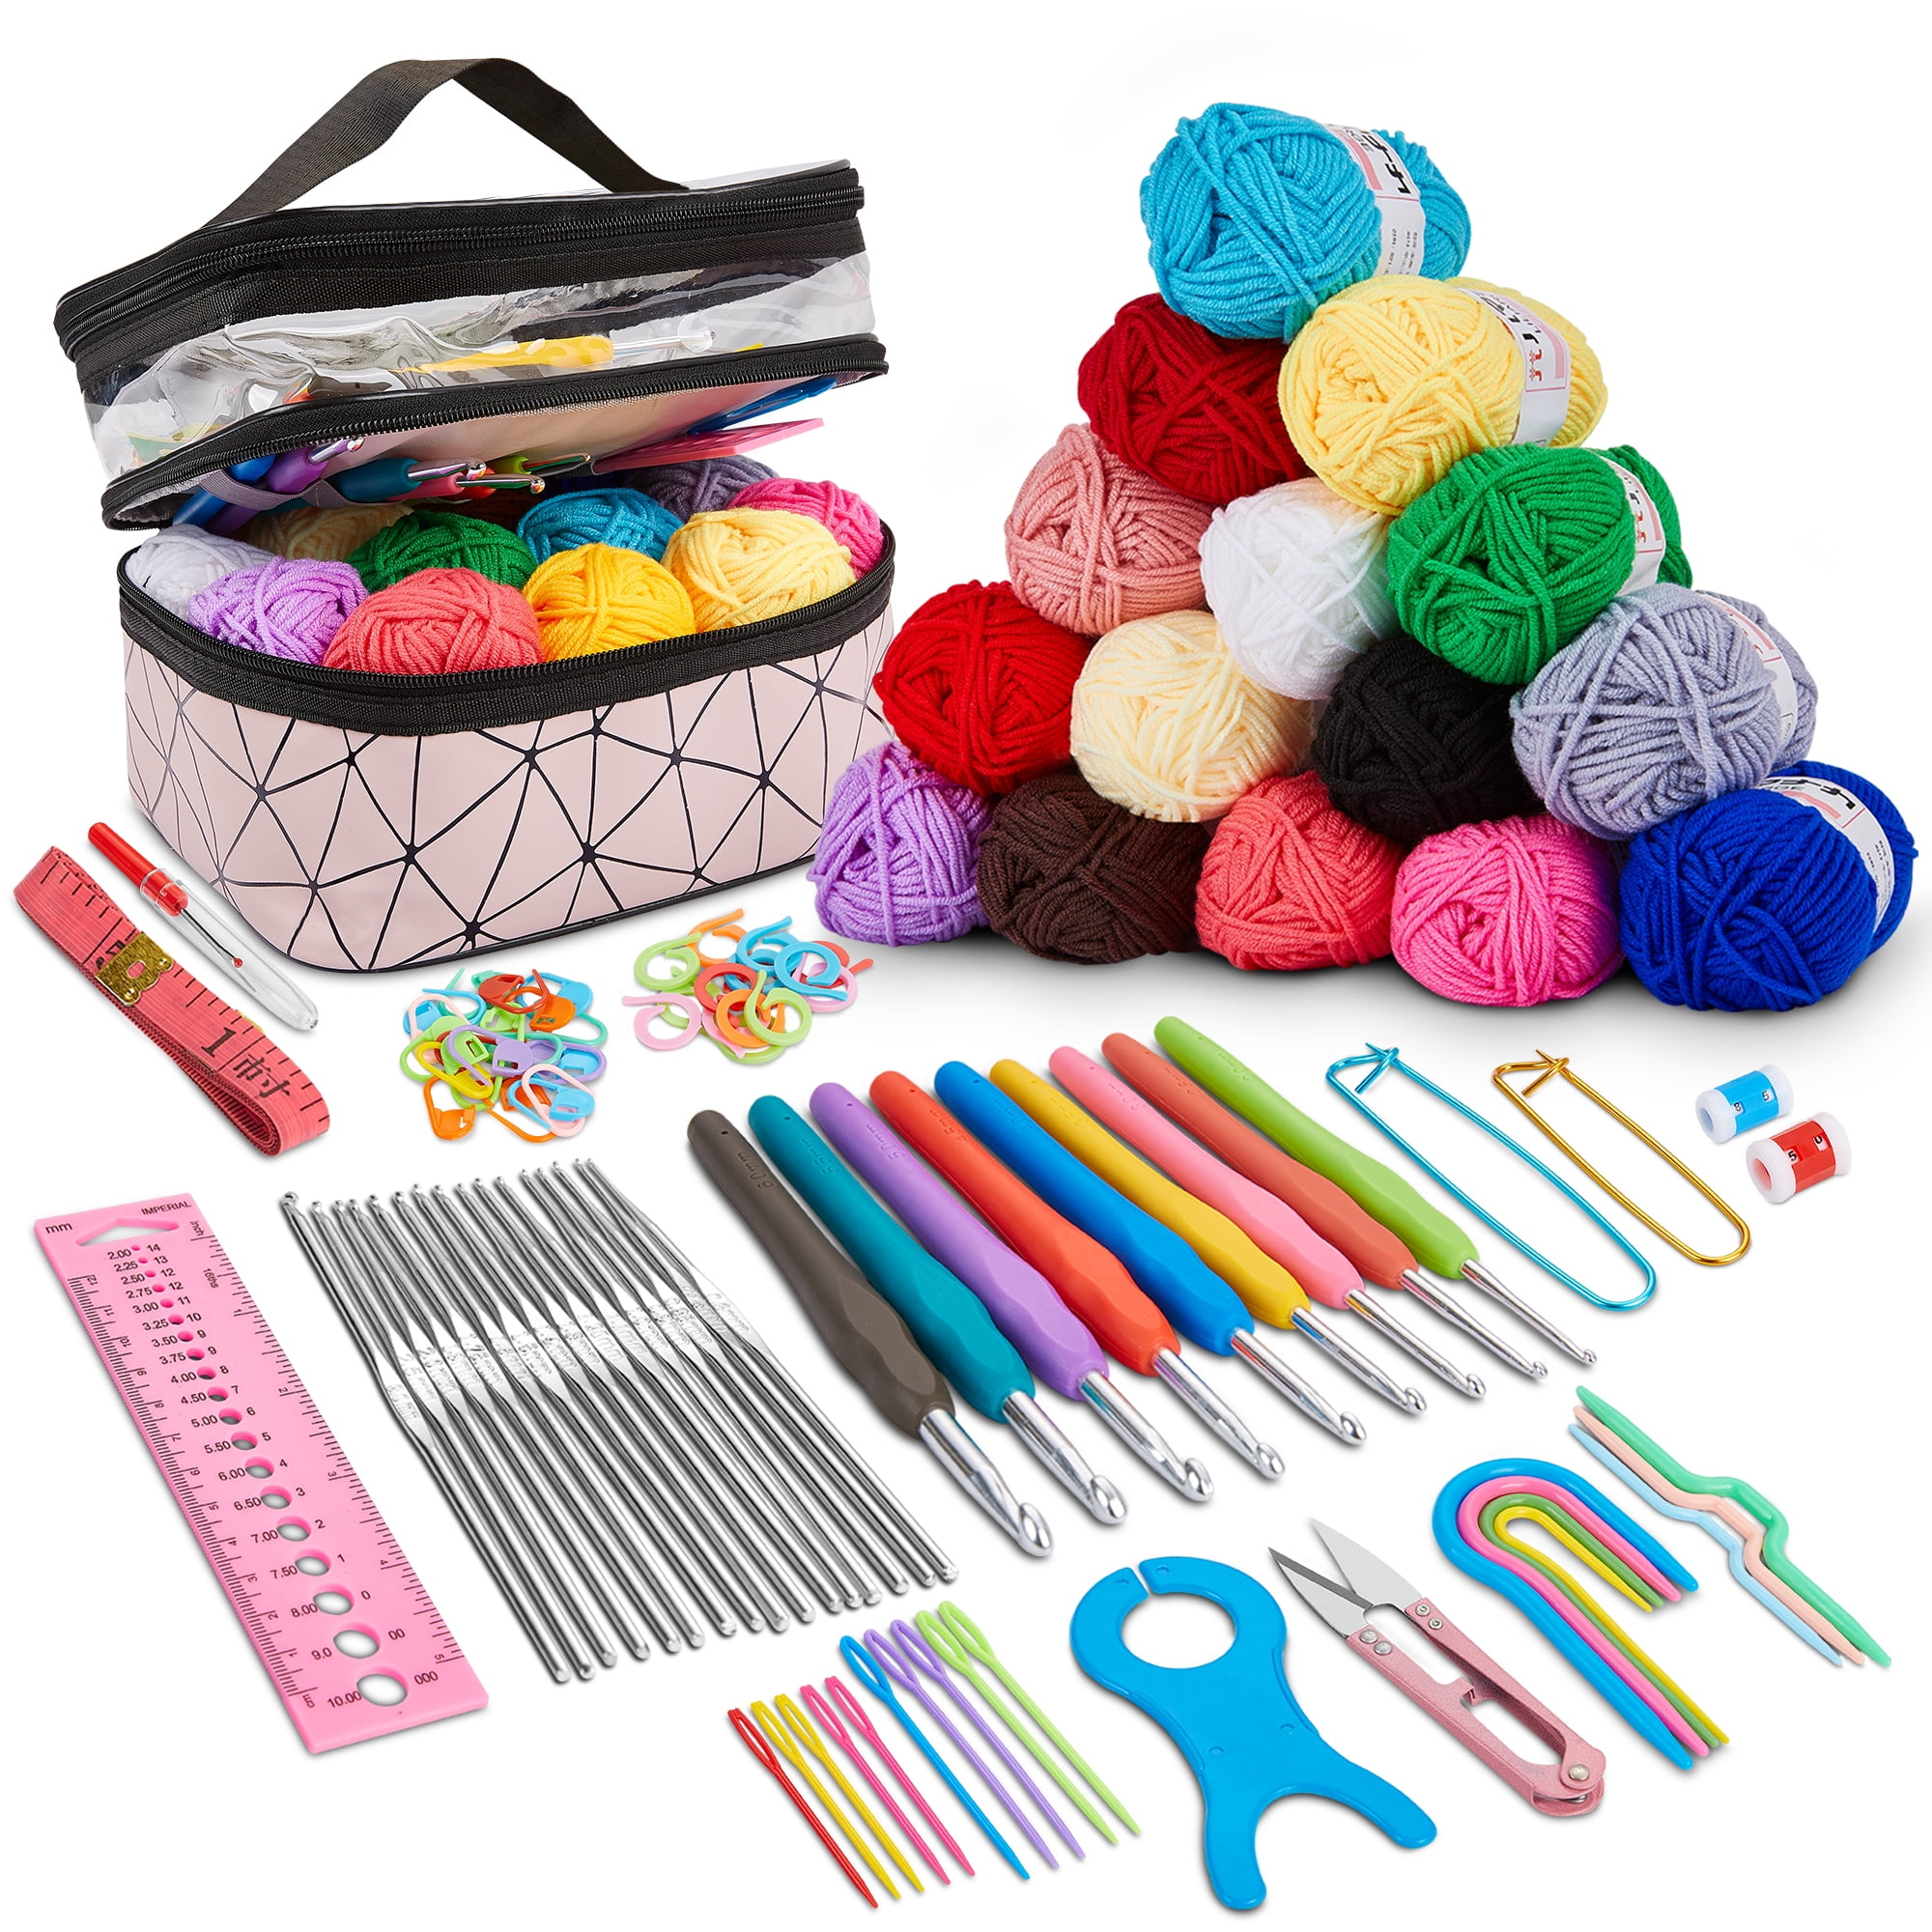 JTWEEN 68 Pcs Colorful Crochet Kits for Beginners Colorful Crochet Hook Set  with Case Practical Knitting Starter Kit with 13 Crochet Hooks 6 Rolls Yarn  for Adults Kids 